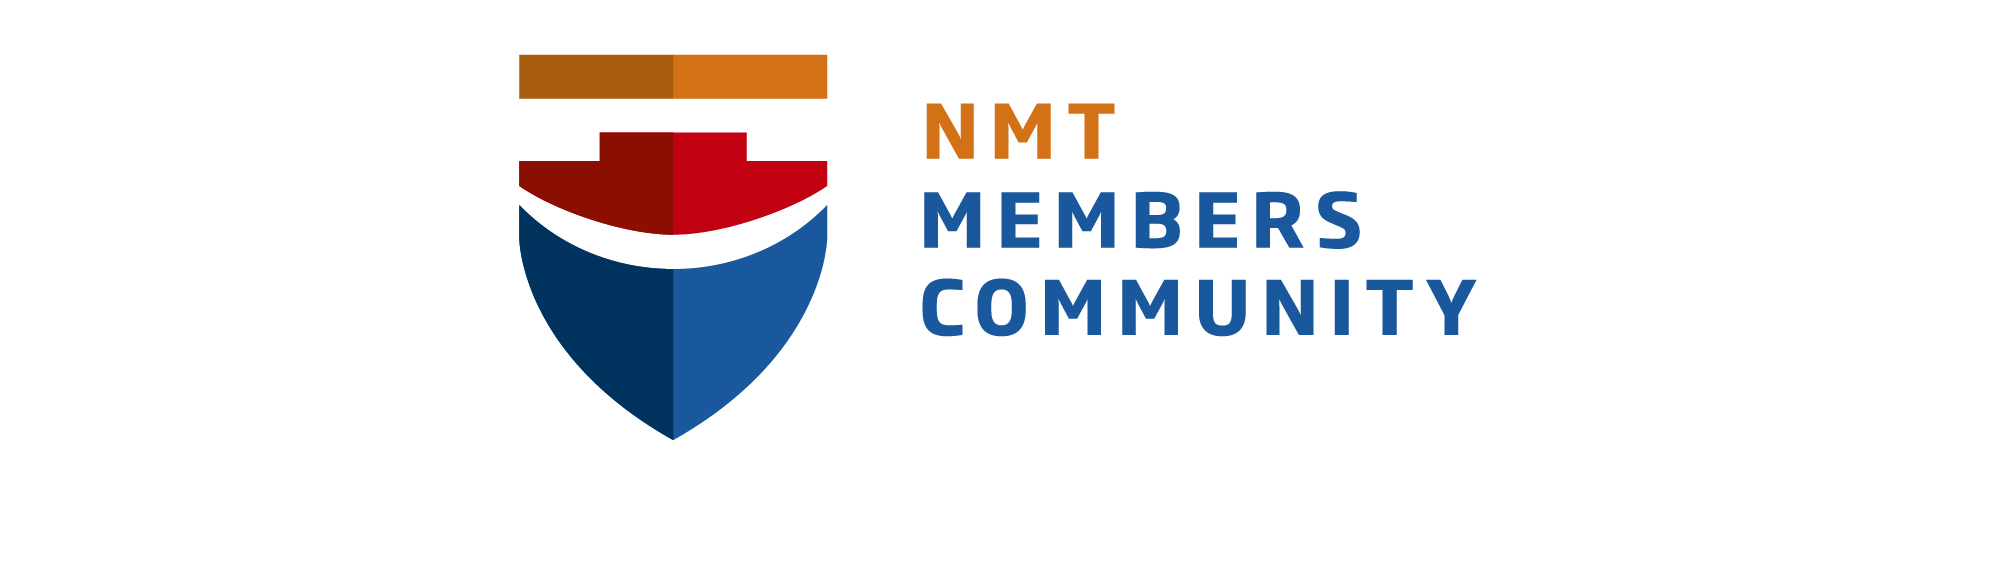 NMT Member Community Web Banners